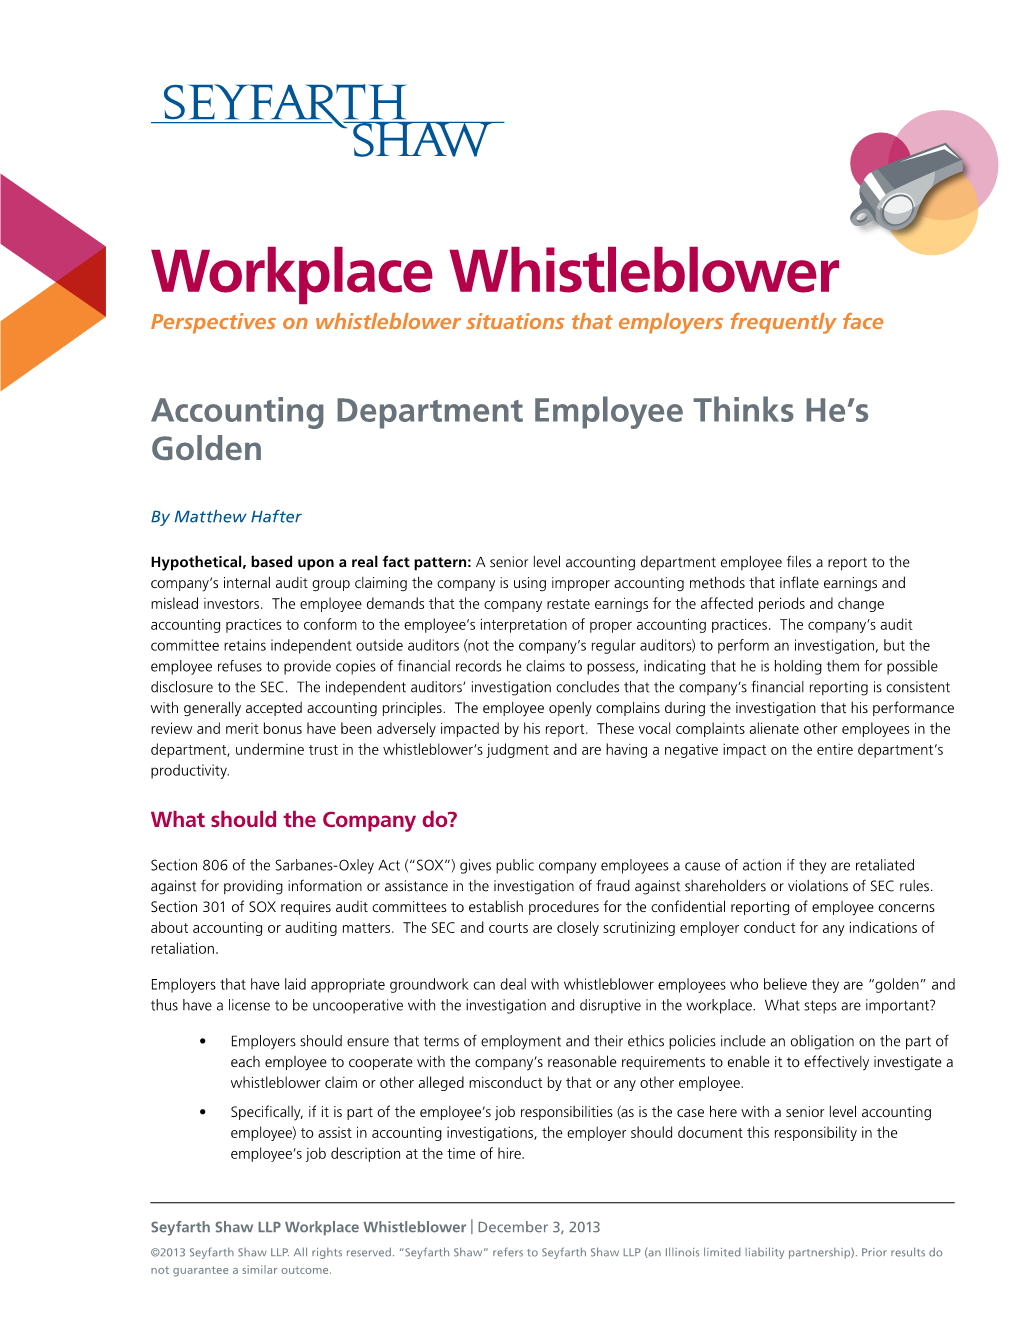 Workplace Whistleblower Perspectives on Whistleblower Situations That Employers Frequently Face